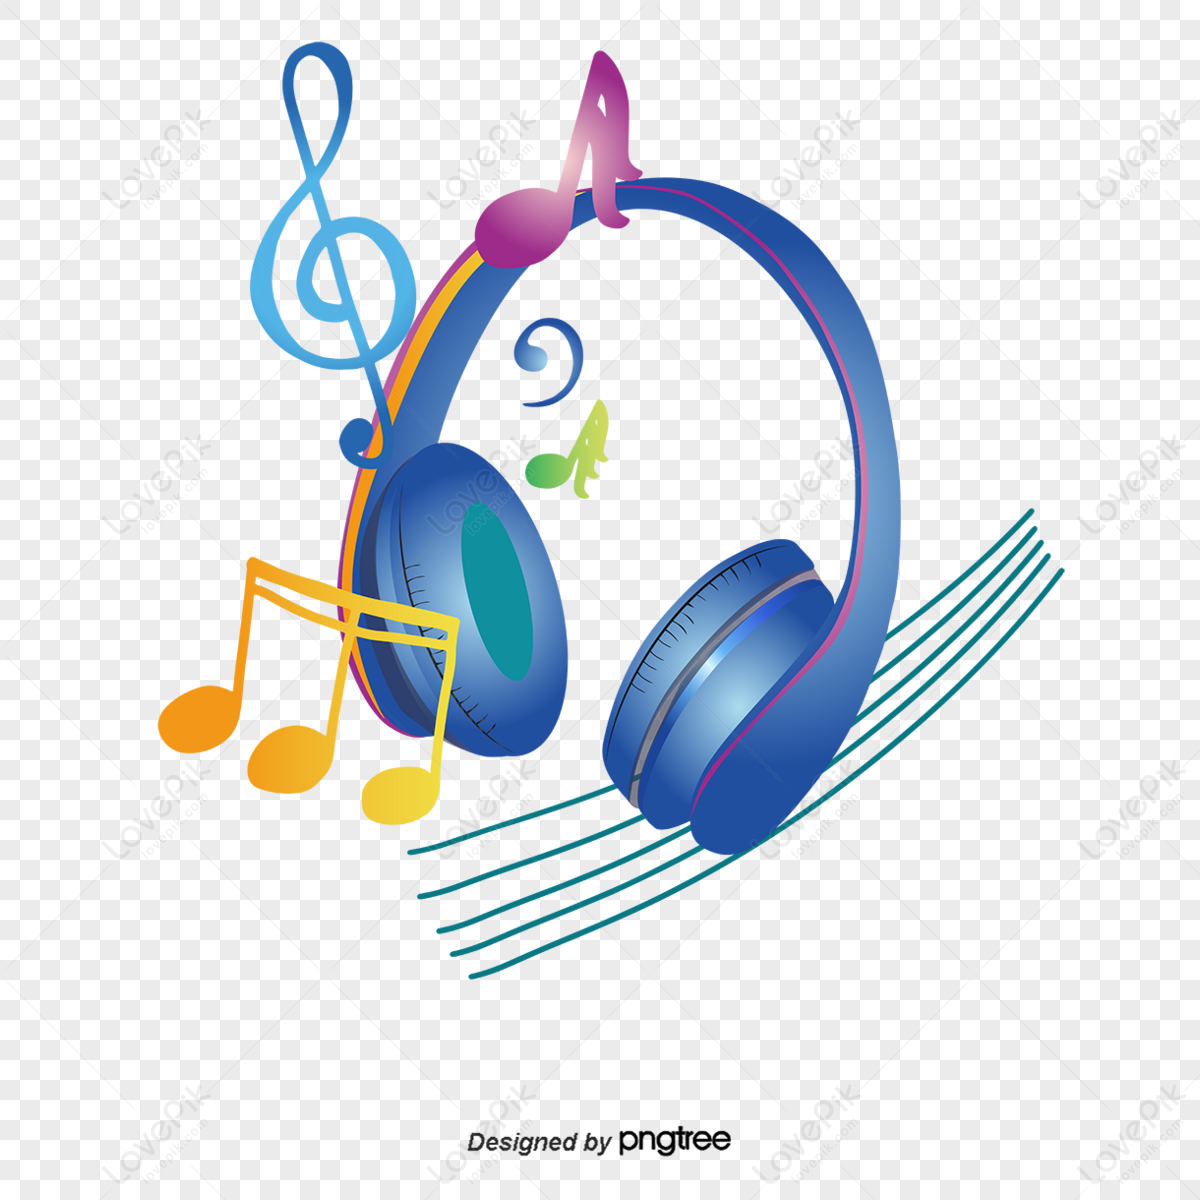 Colorful headphones with lights, perfect for entertainment png download -  3256*3712 - Free Transparent Headphones png Download. - CleanPNG / KissPNG